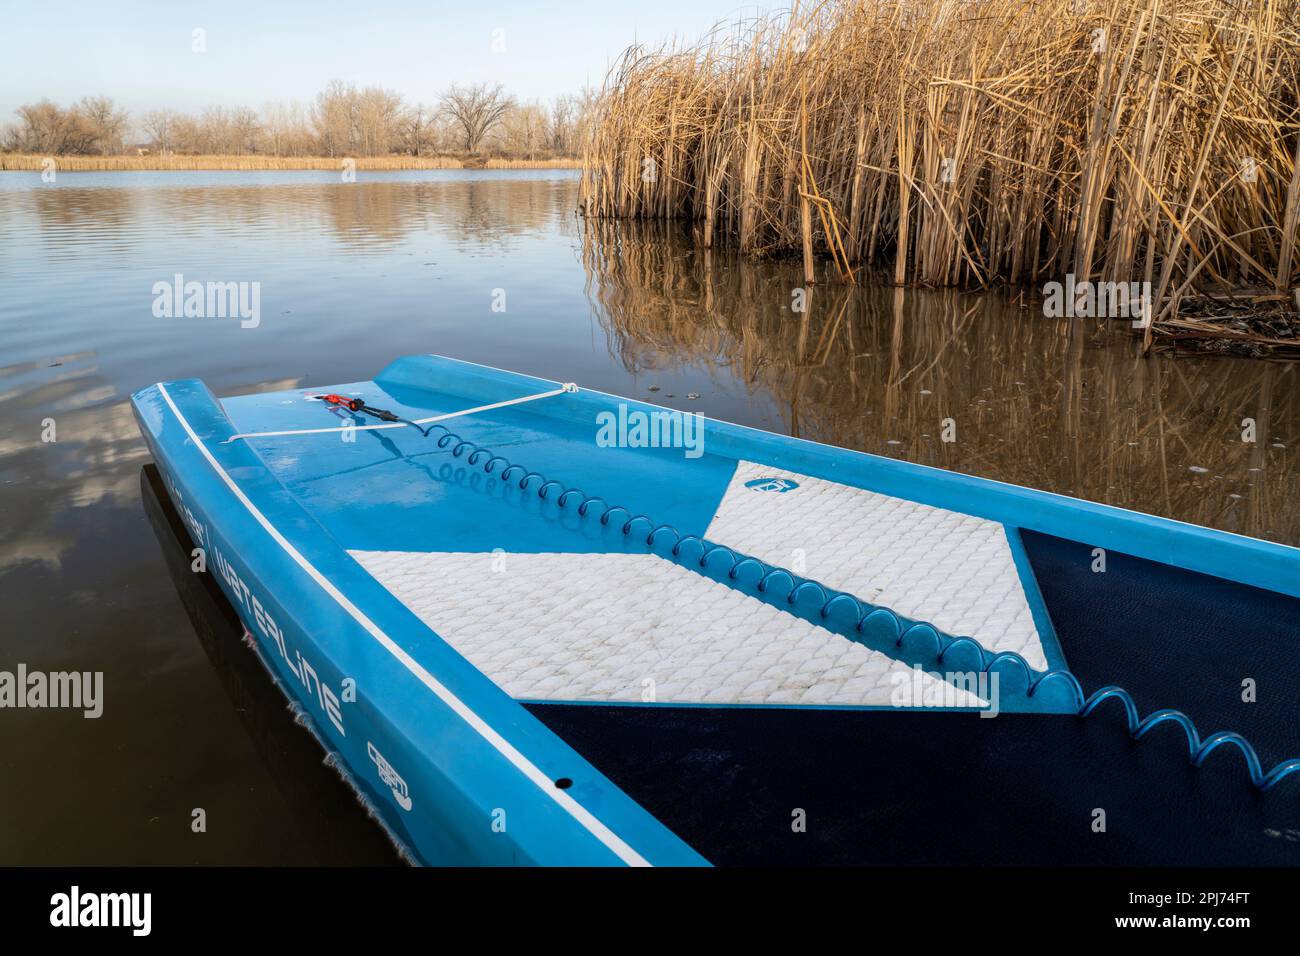 Fort Collins, CO, USA - March 30, 2023: Tail of a touring stand up paddleboard designed for flatwater (2023 Waterline model by Starboard) on a lake sh Stock Photo